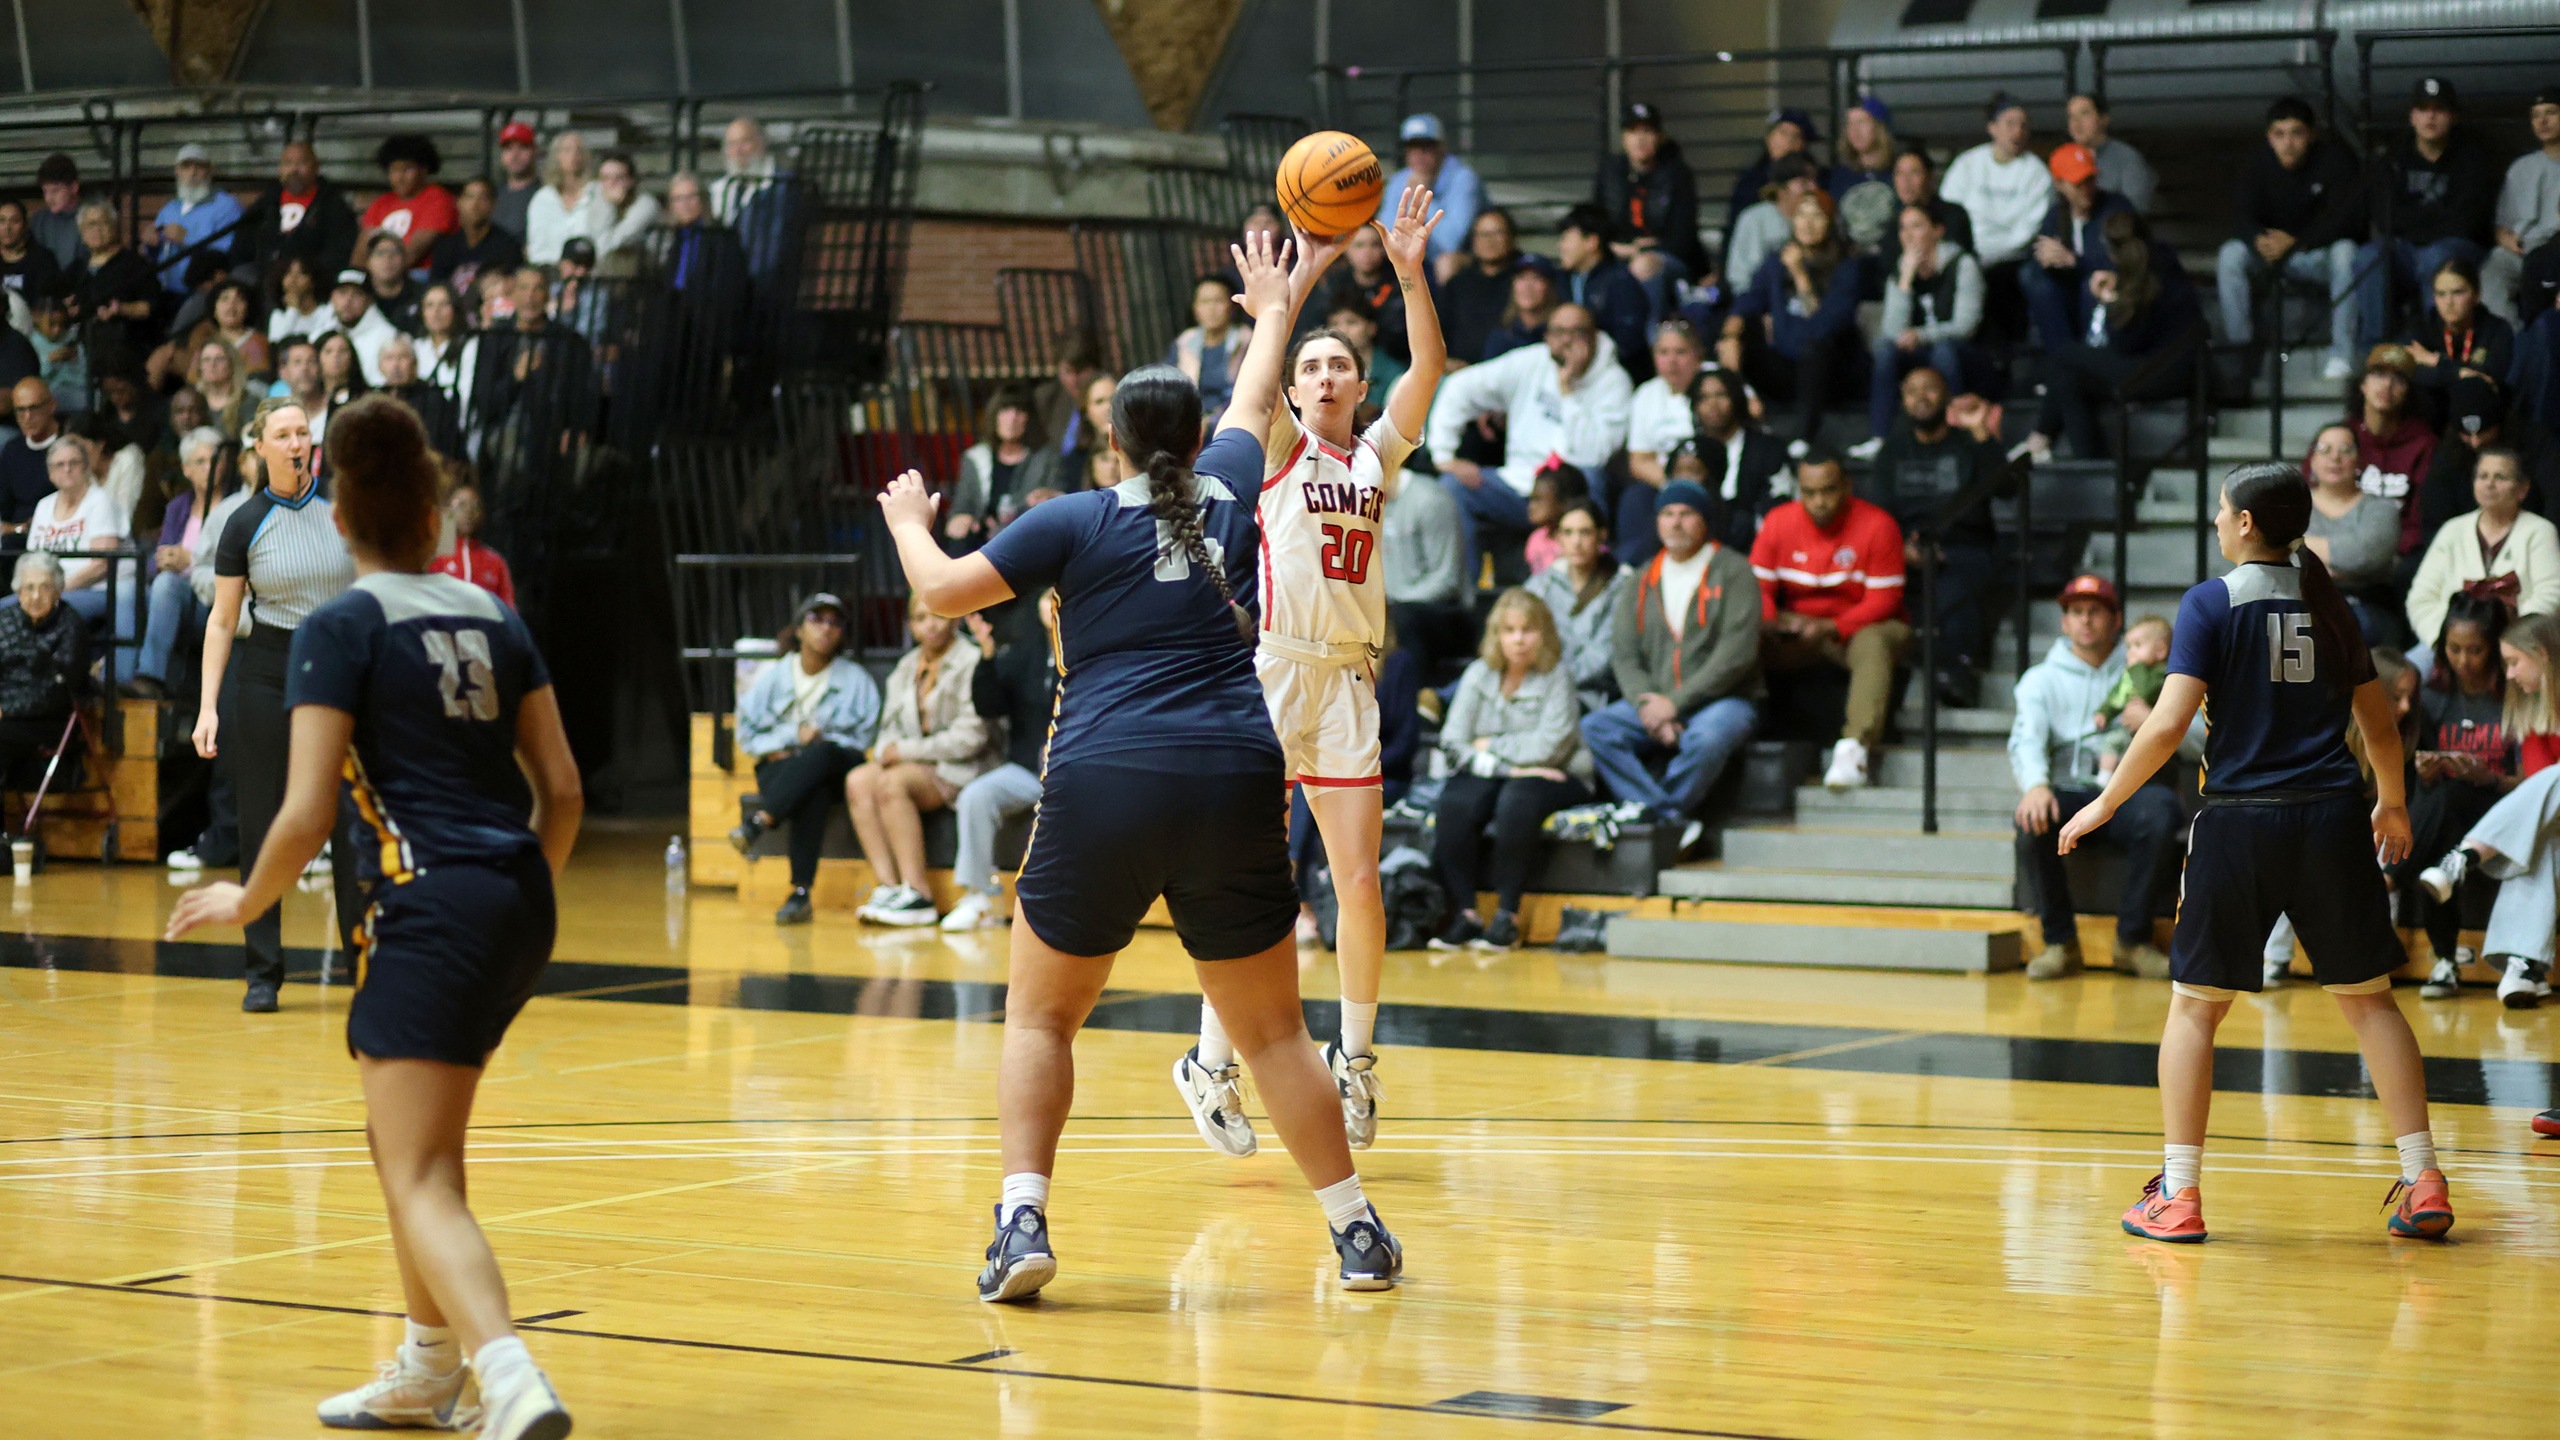 Mackenize Kozina finished with 14 points, six rebounds, two blocks, one assist and a steal. Photo by Hugh Cox.